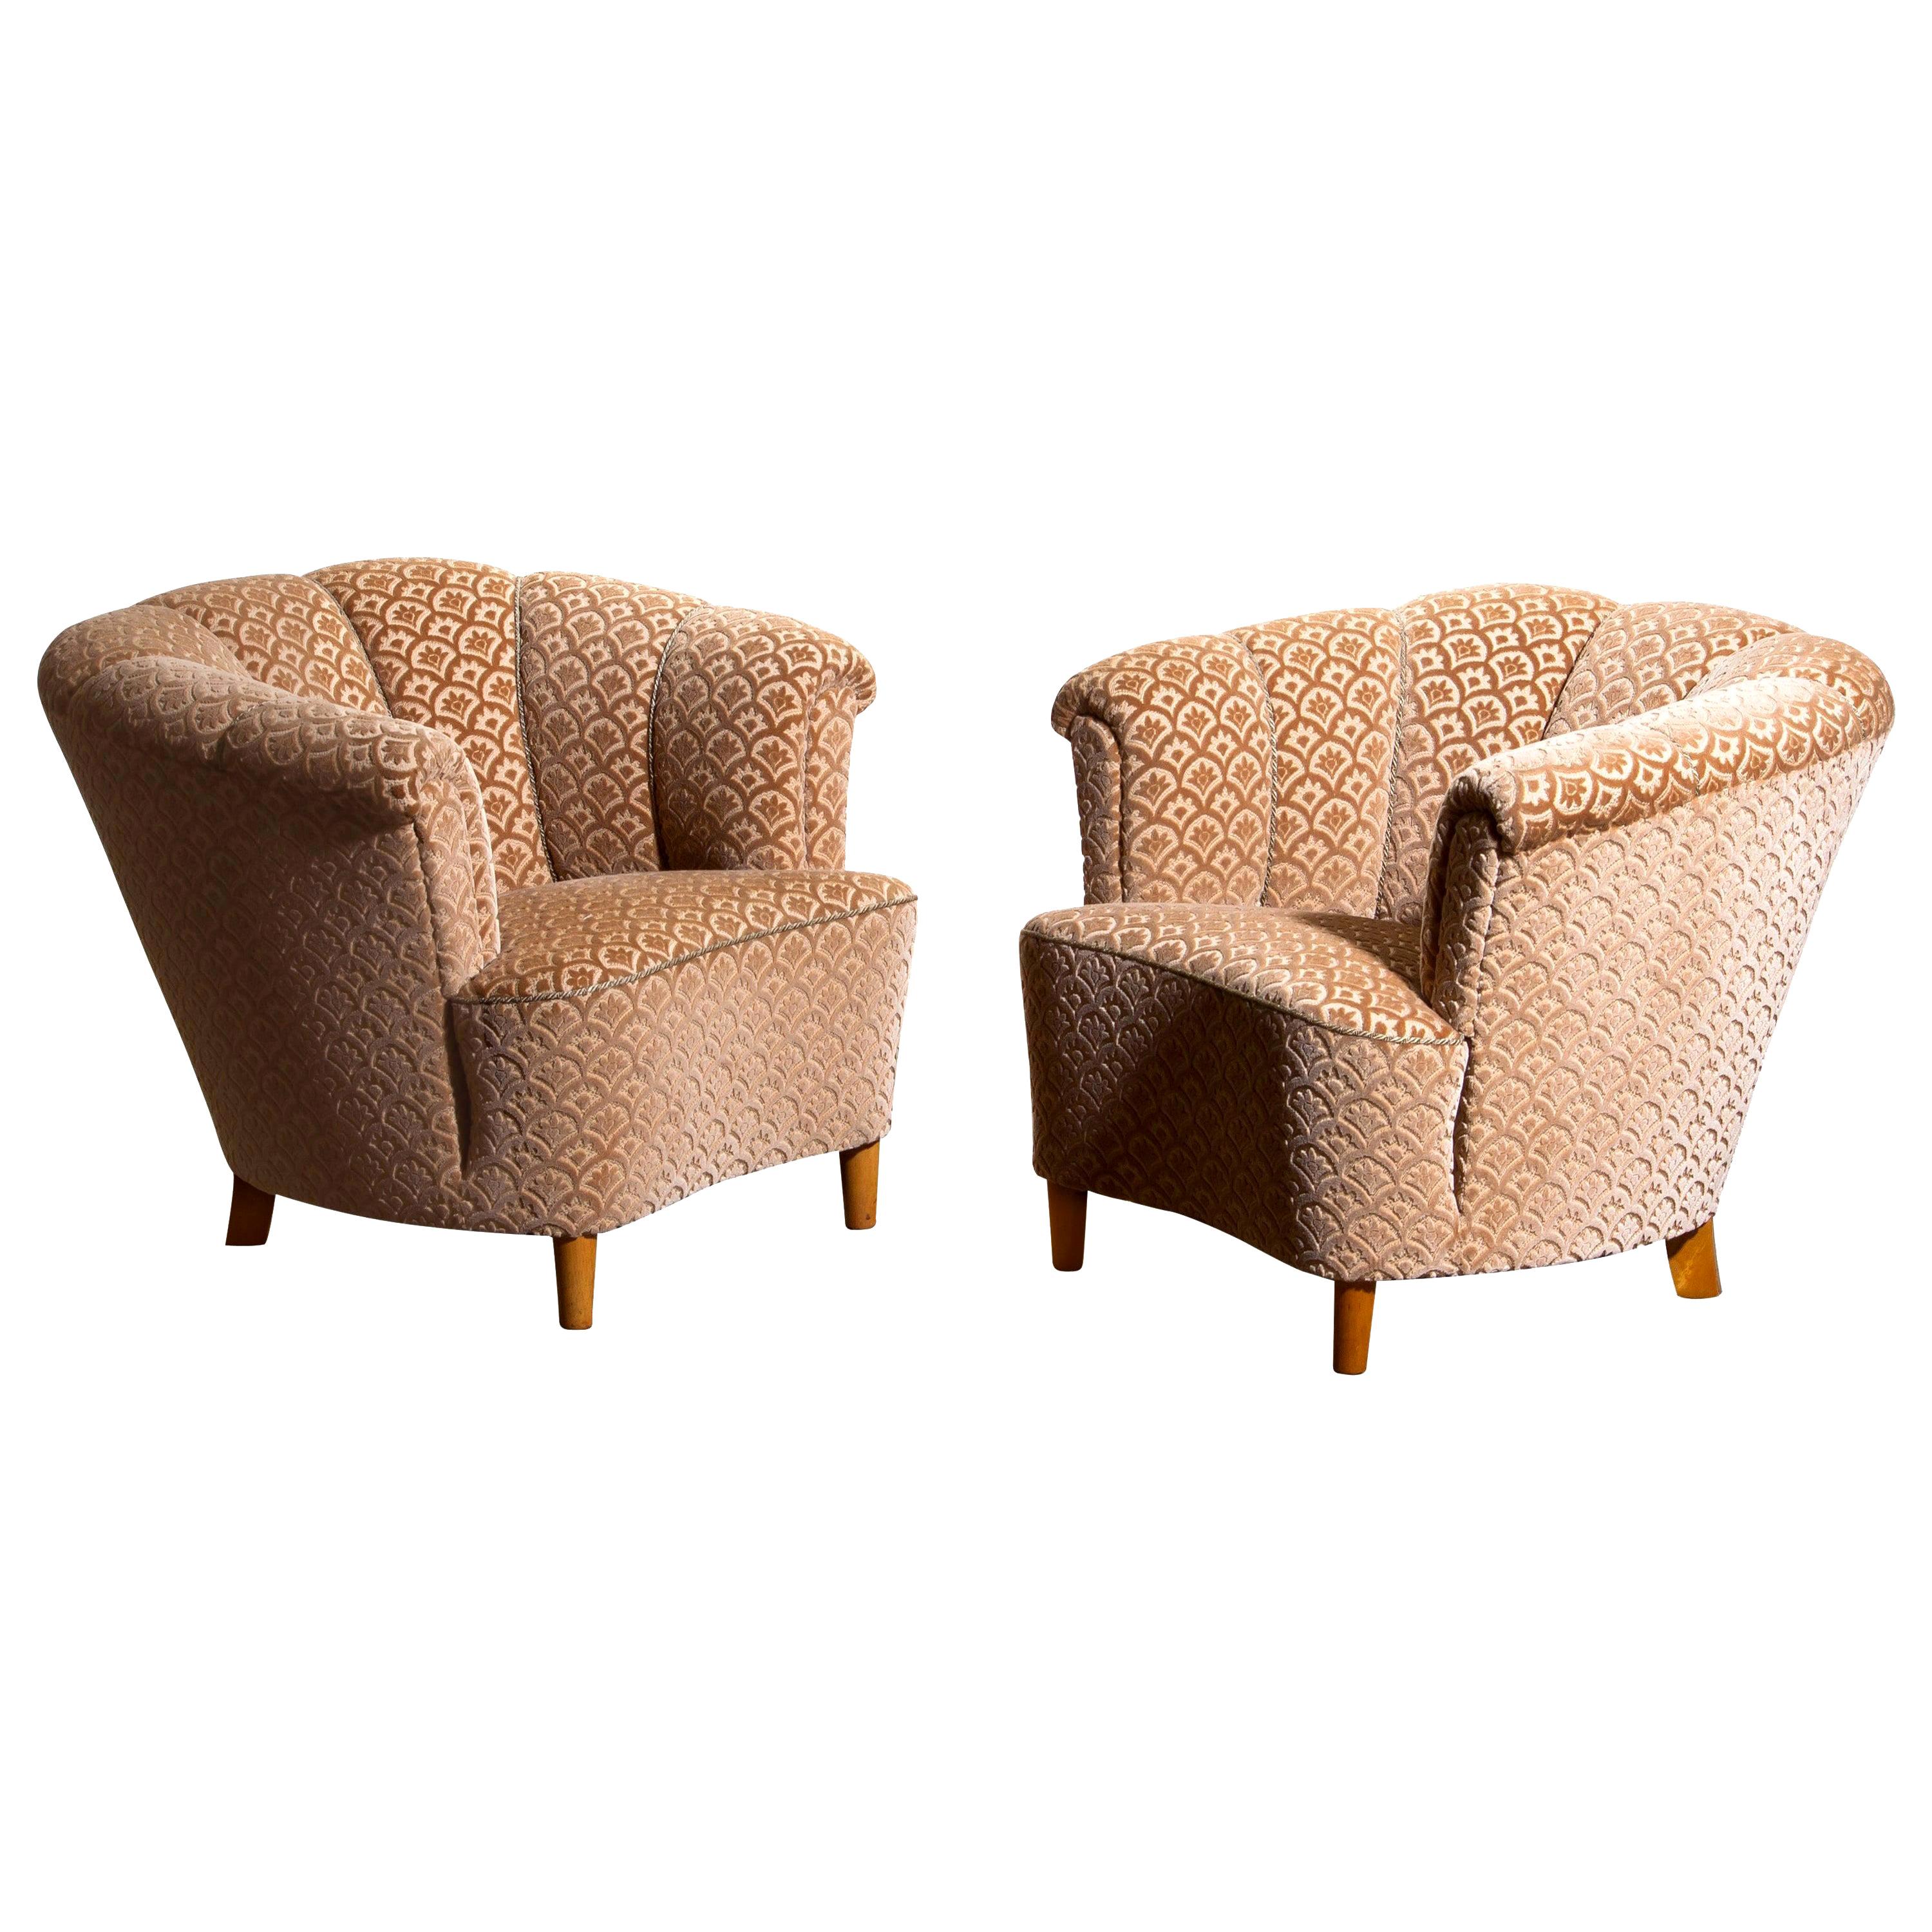 Beautiful set of two comfortable club lounge cocktail chairs from the 1940s.
Both chairs are in original and excellent condition.
The chairs are richly upholstered in flocked velvet and standing on beech legs.
   